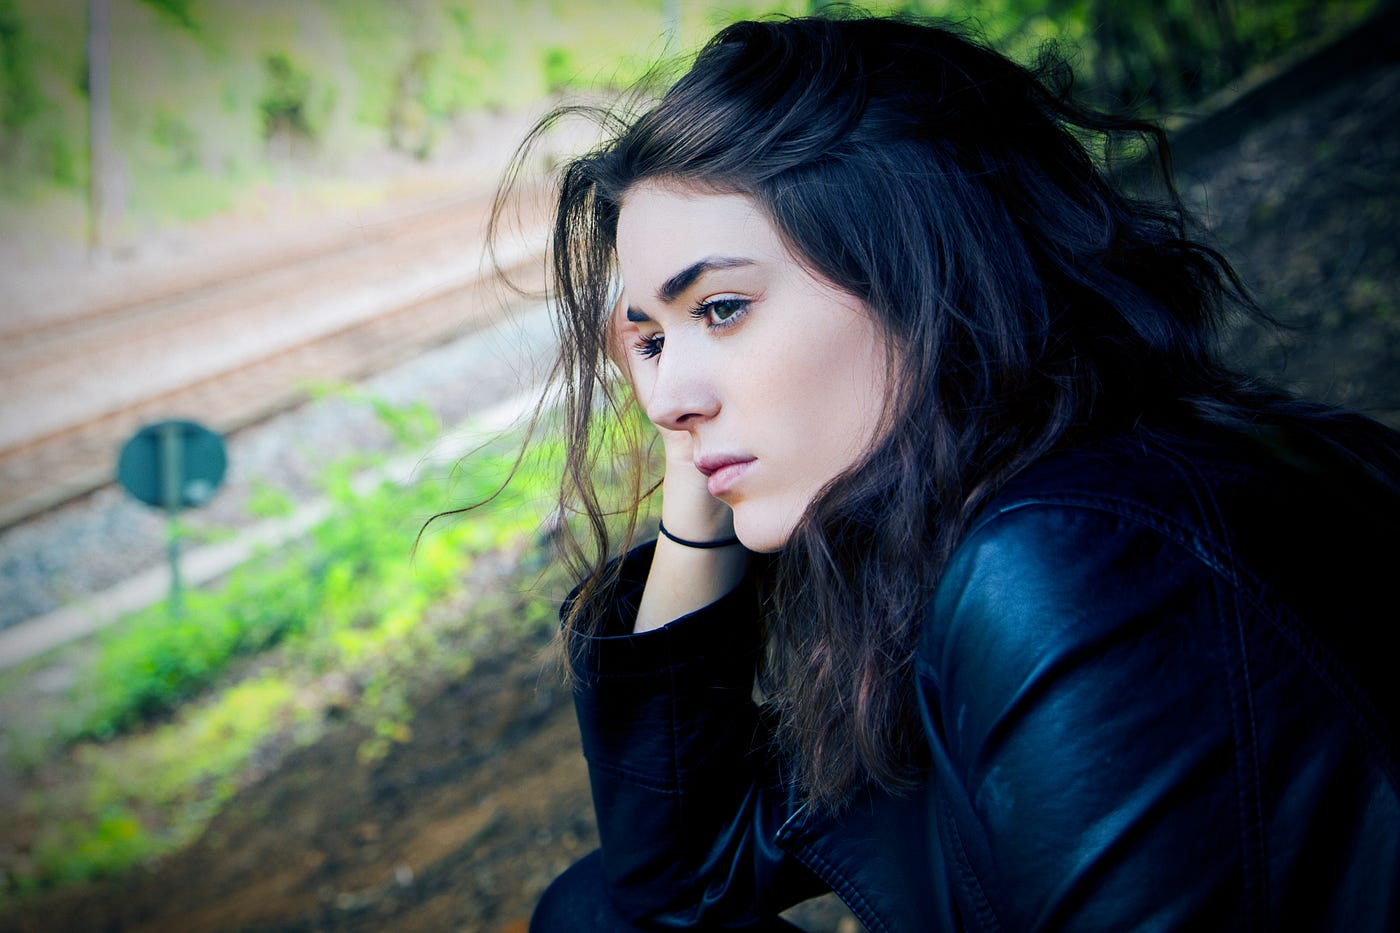 Young brunette woman seen in profile. Her right hand is on the side of her head as she looks to the left of the image. The woman looks pensive. Railroad tracks in the distance.